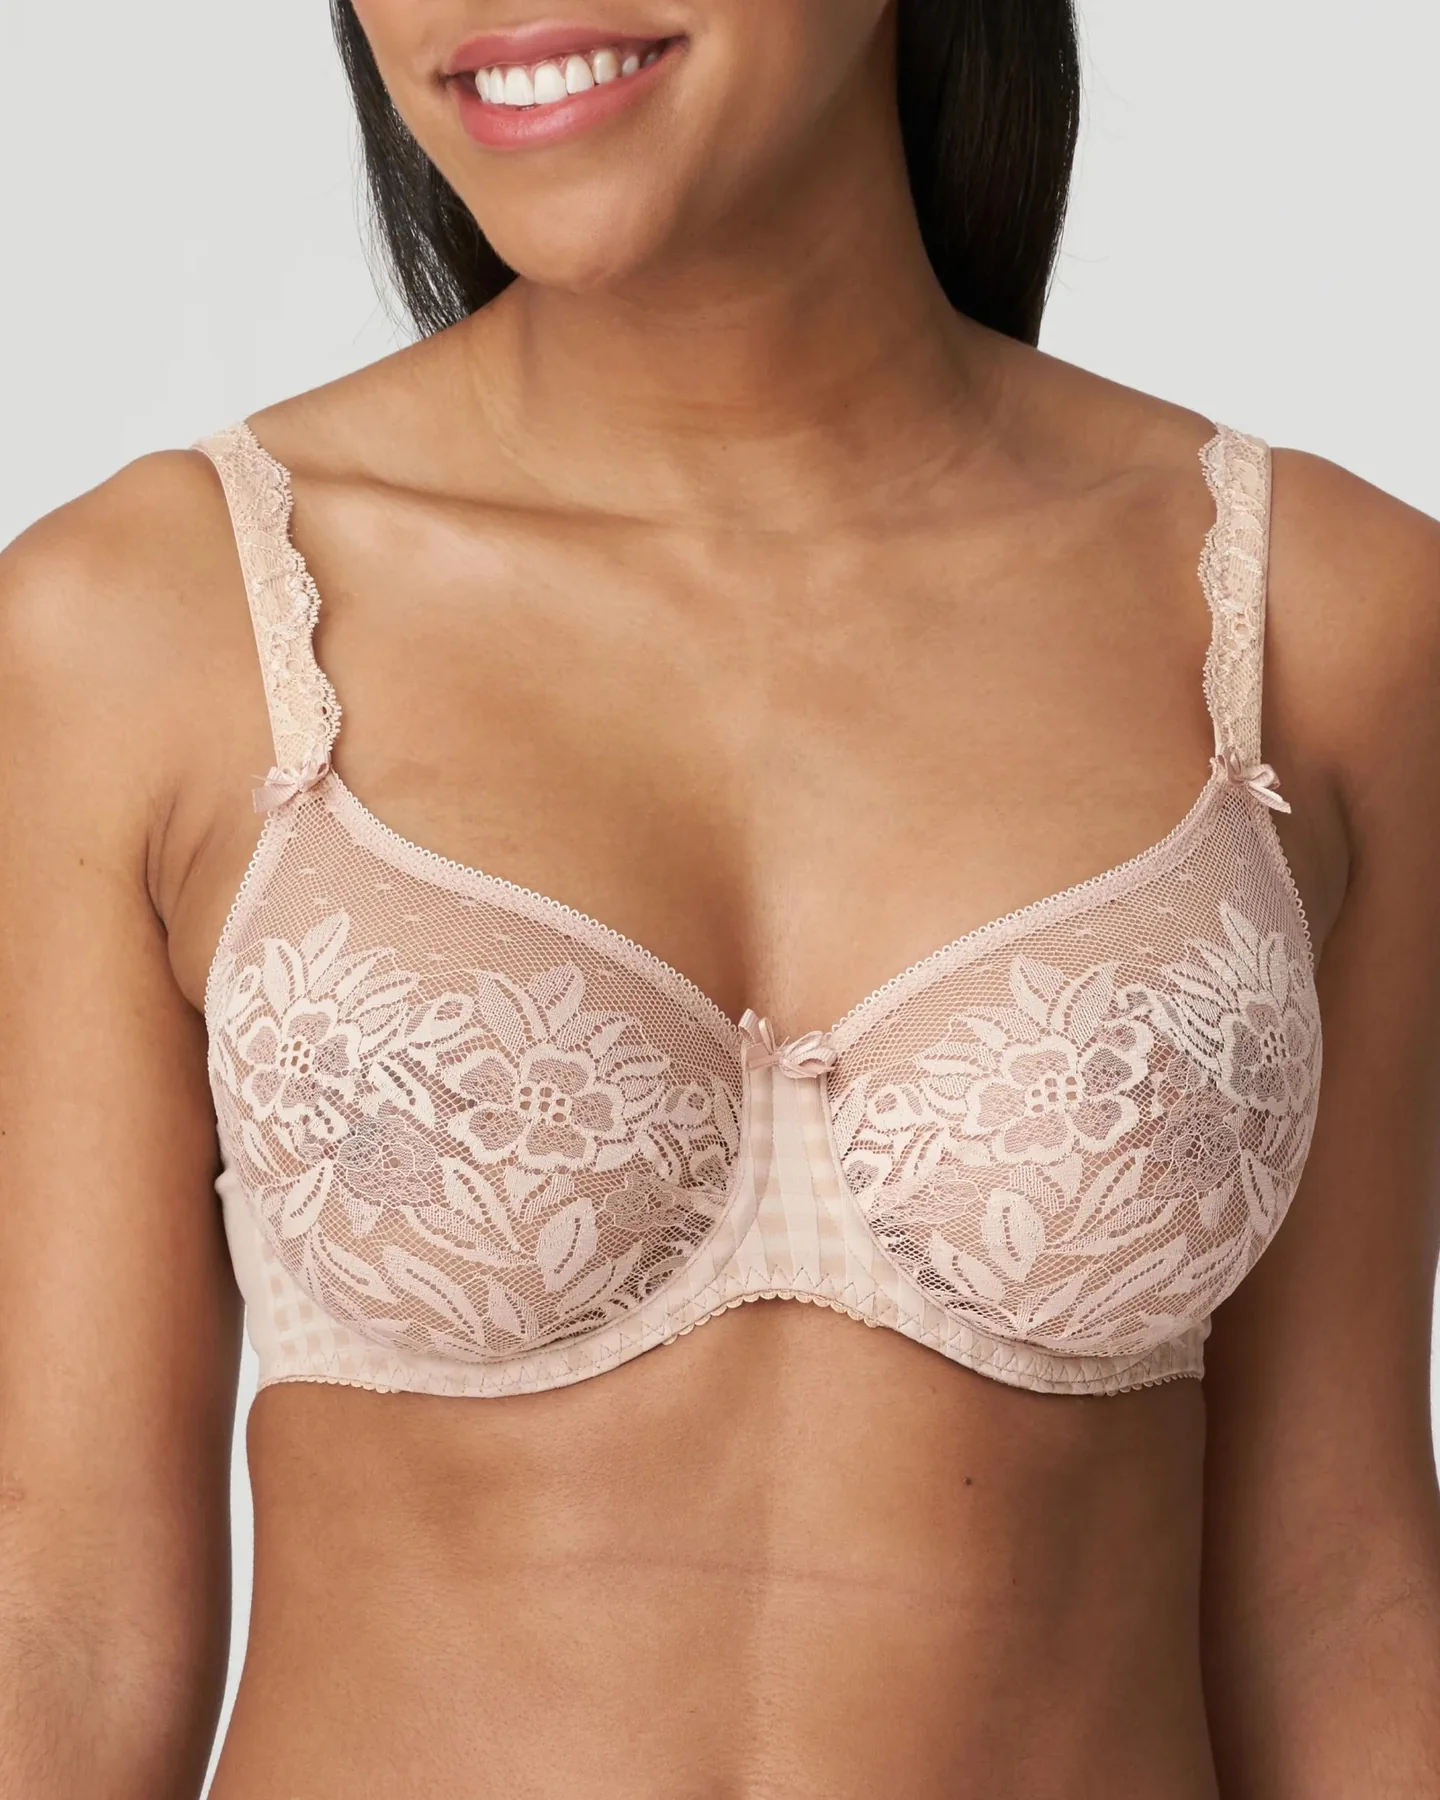 Bra Review - Prima Donna Madison Non Padded Full Cup Seamless Bra